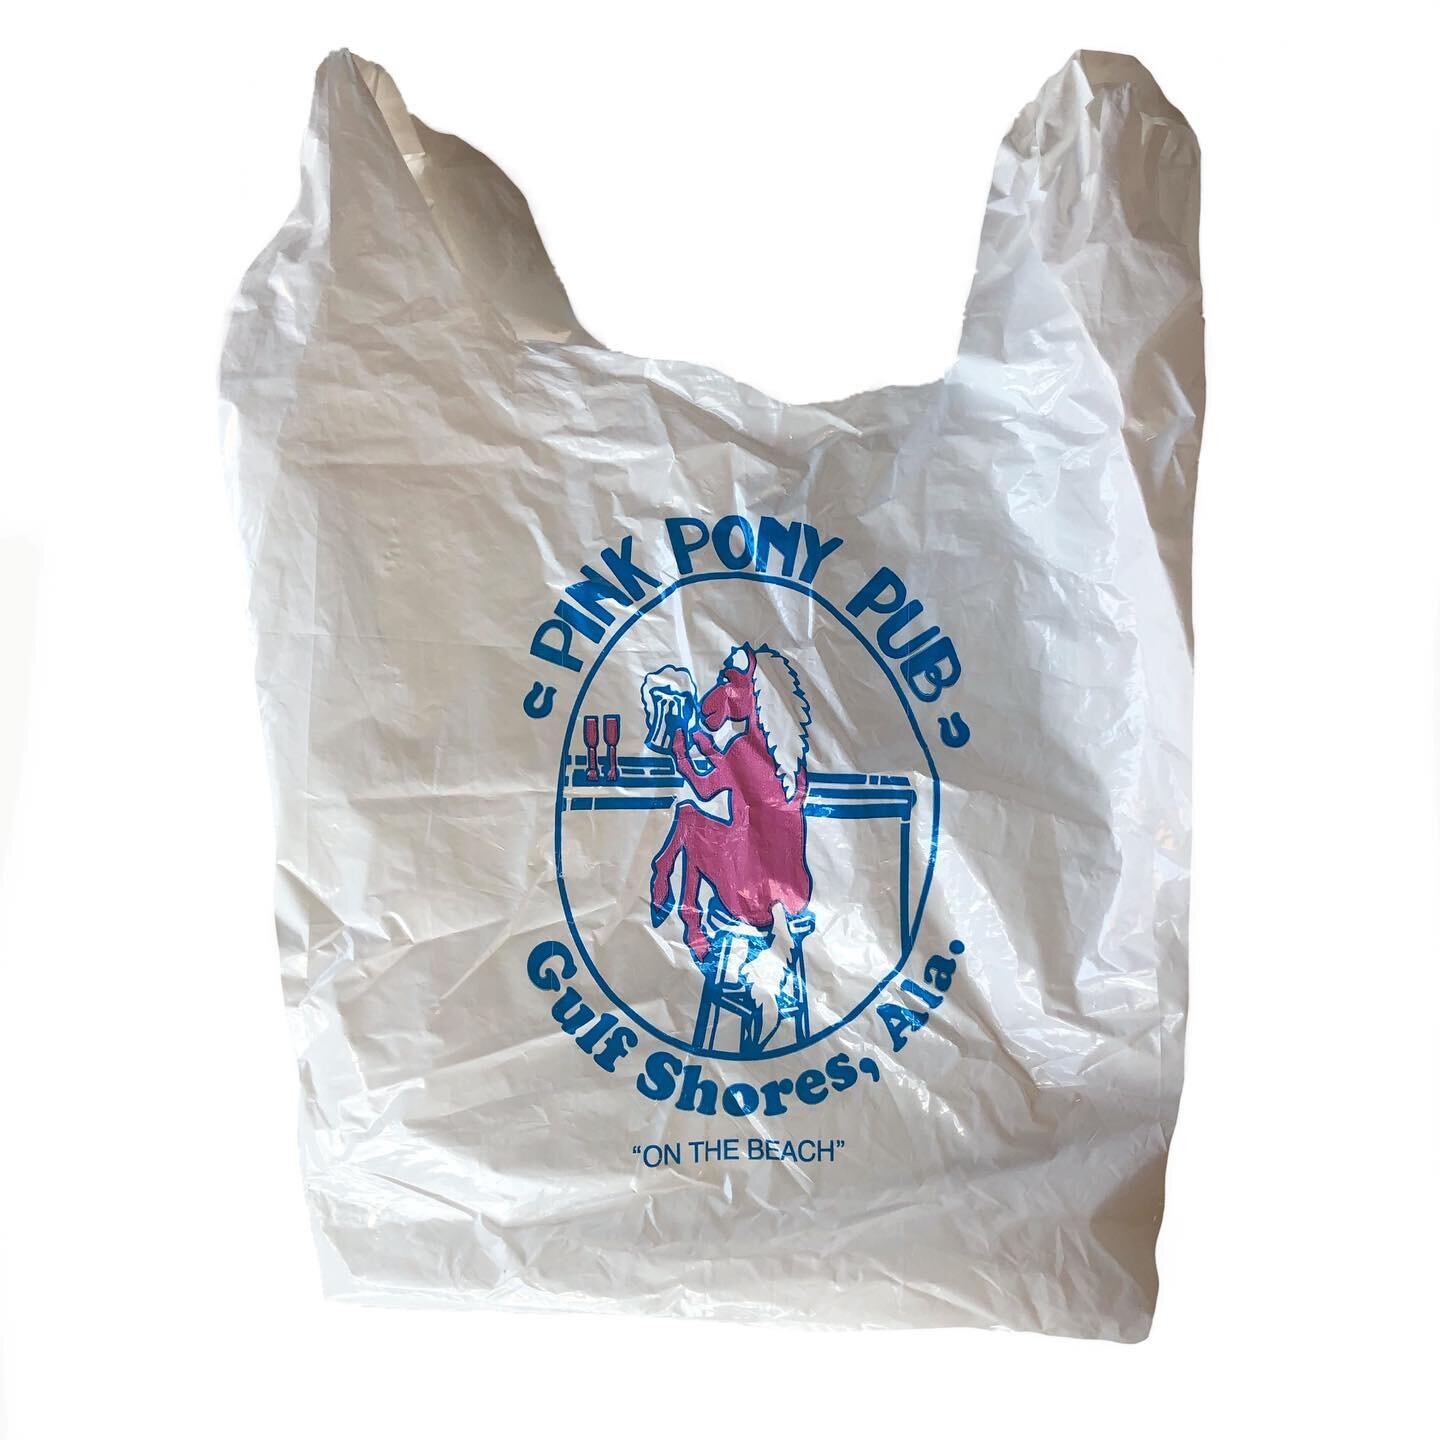 The bag from Alabama